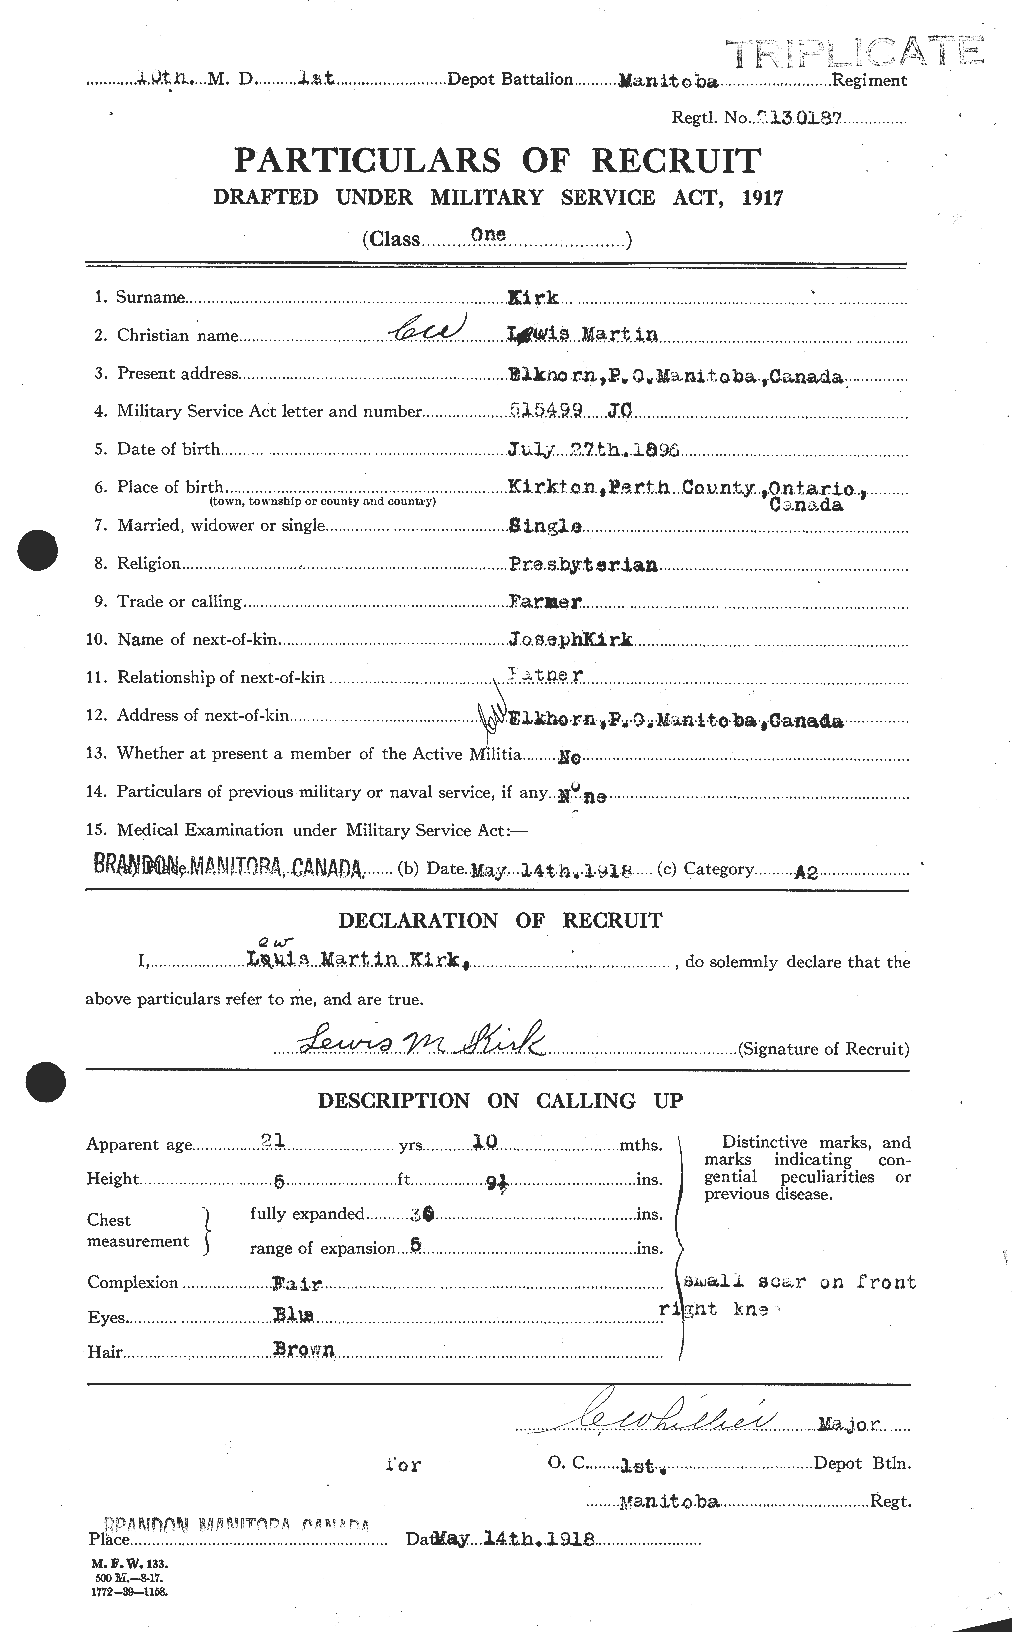 Personnel Records of the First World War - CEF 440876a